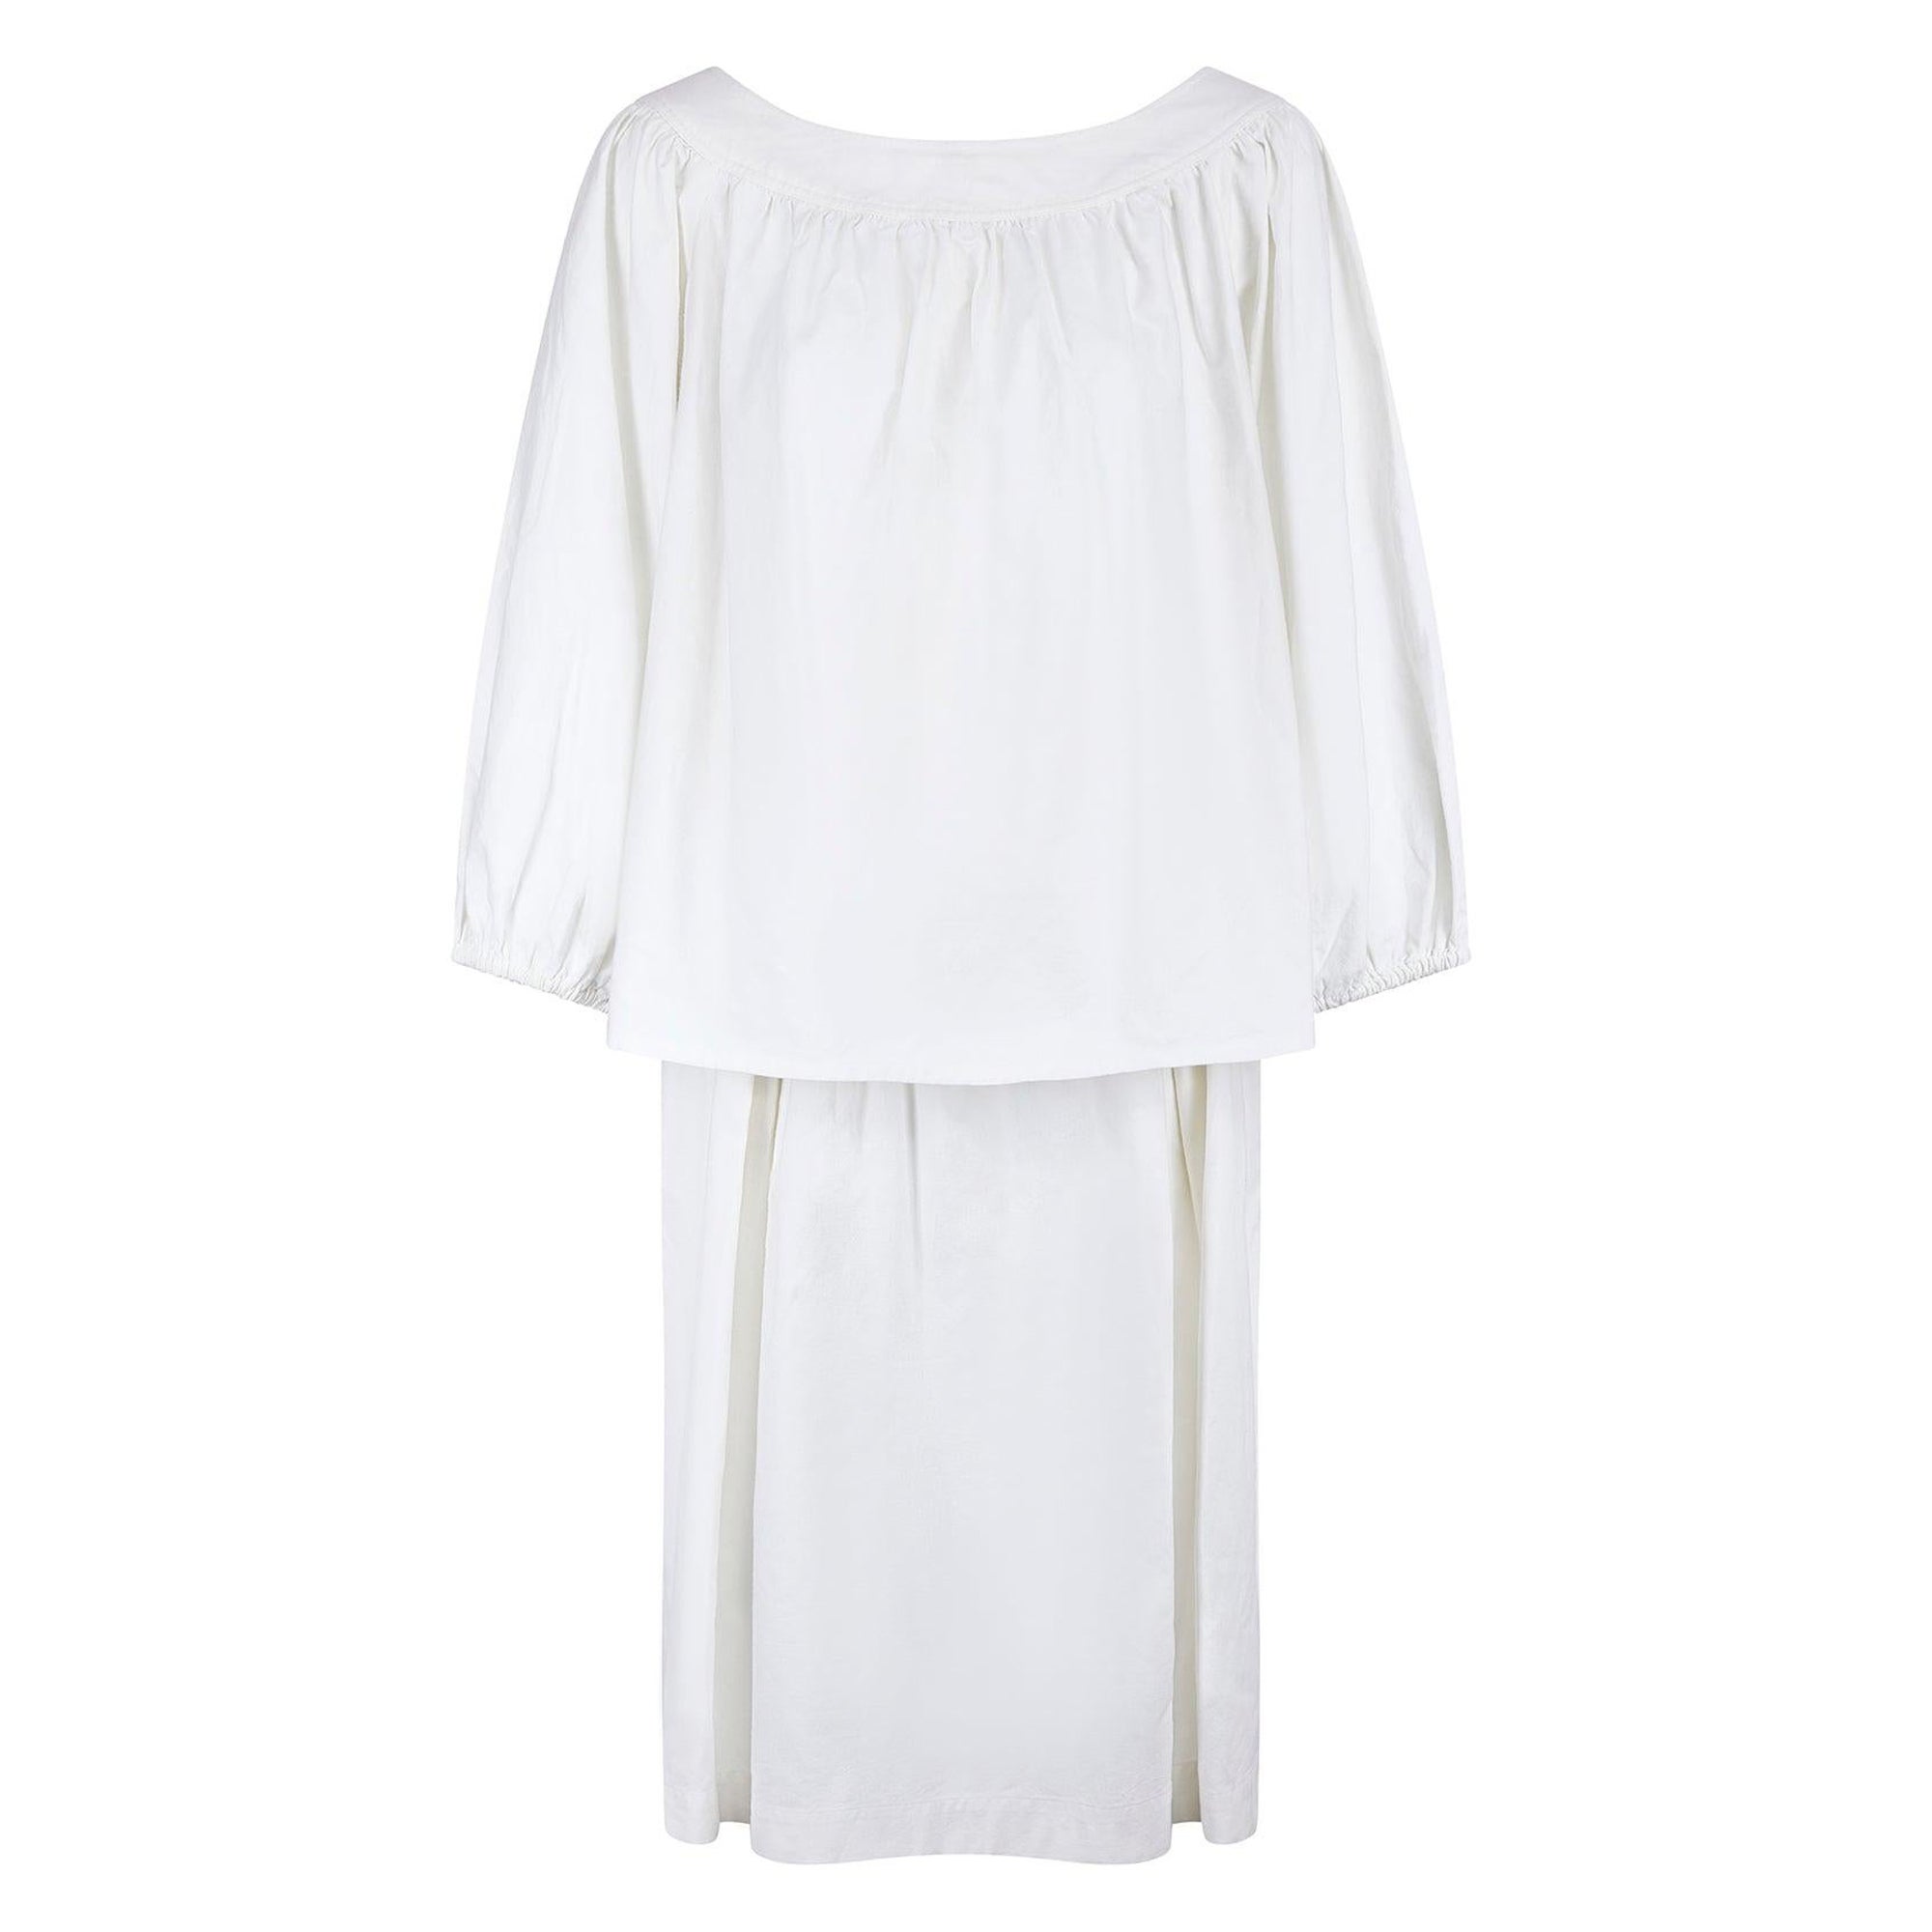 1975 Yves Saint Laurent Runway White Cotton Skirt and Top Set For Sale